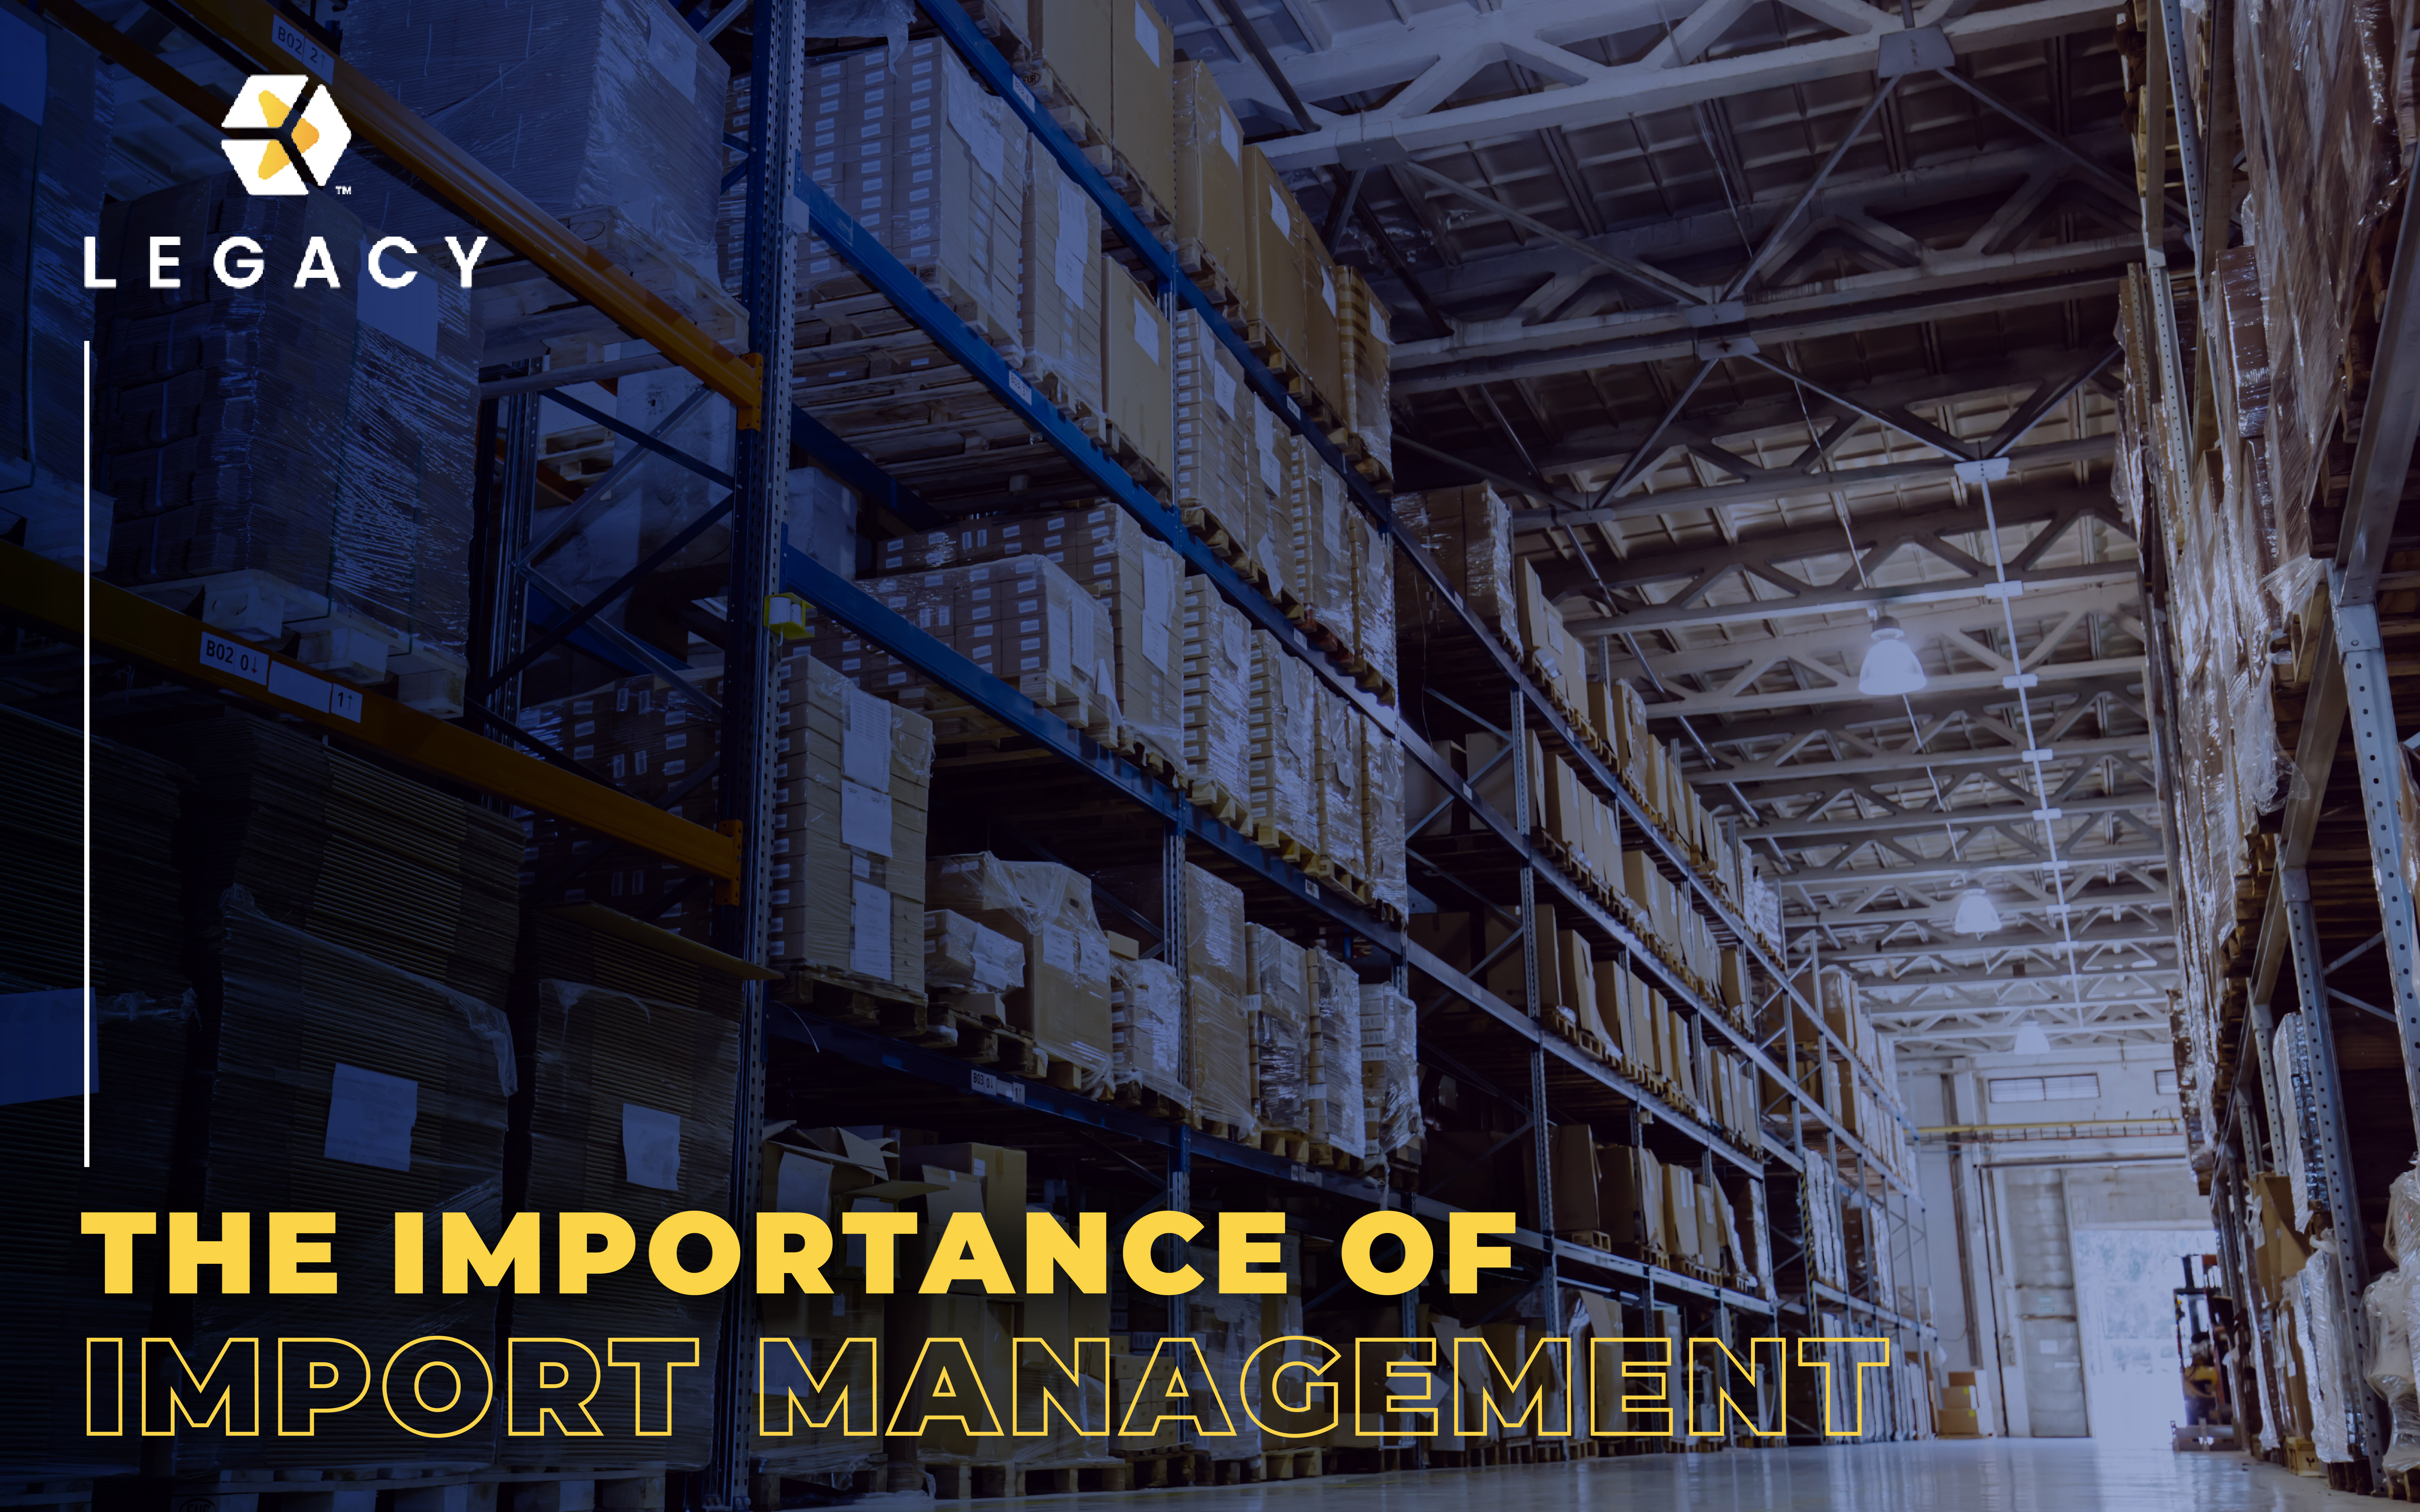 The Importance of Import Management